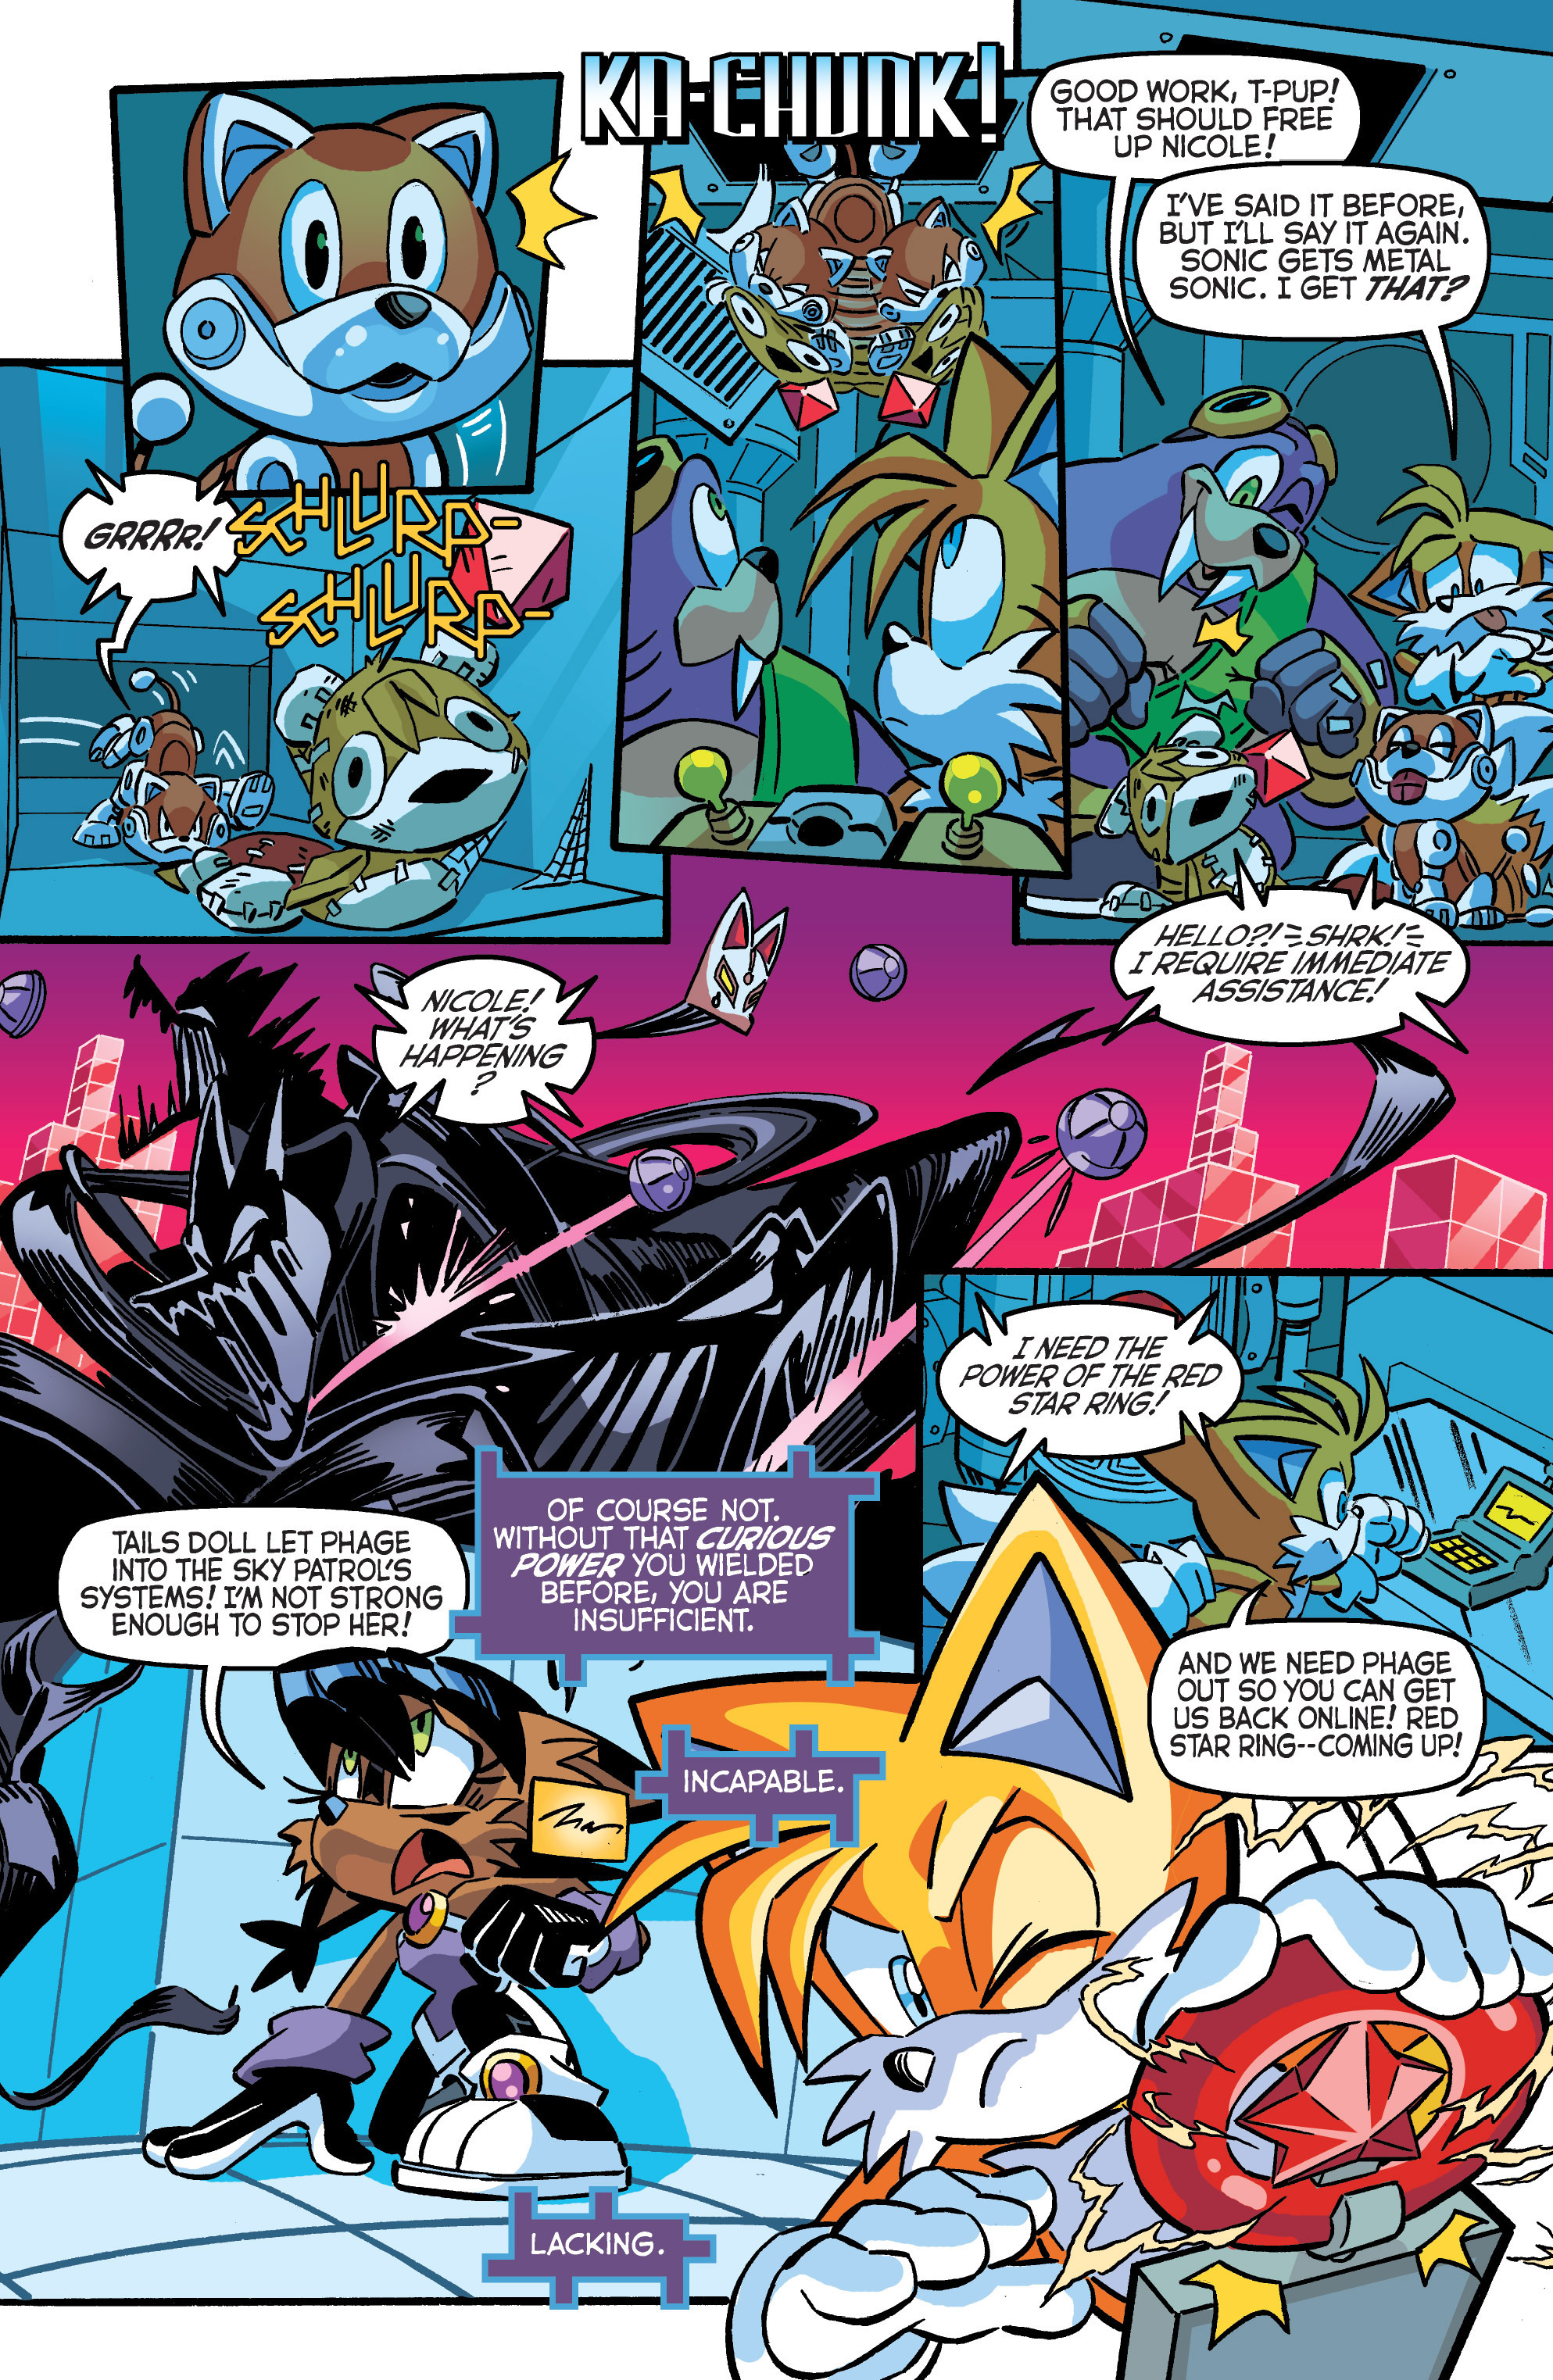 Sonic the Hedgehog (IDW) - Eggman Empire / Characters - TV Tropes